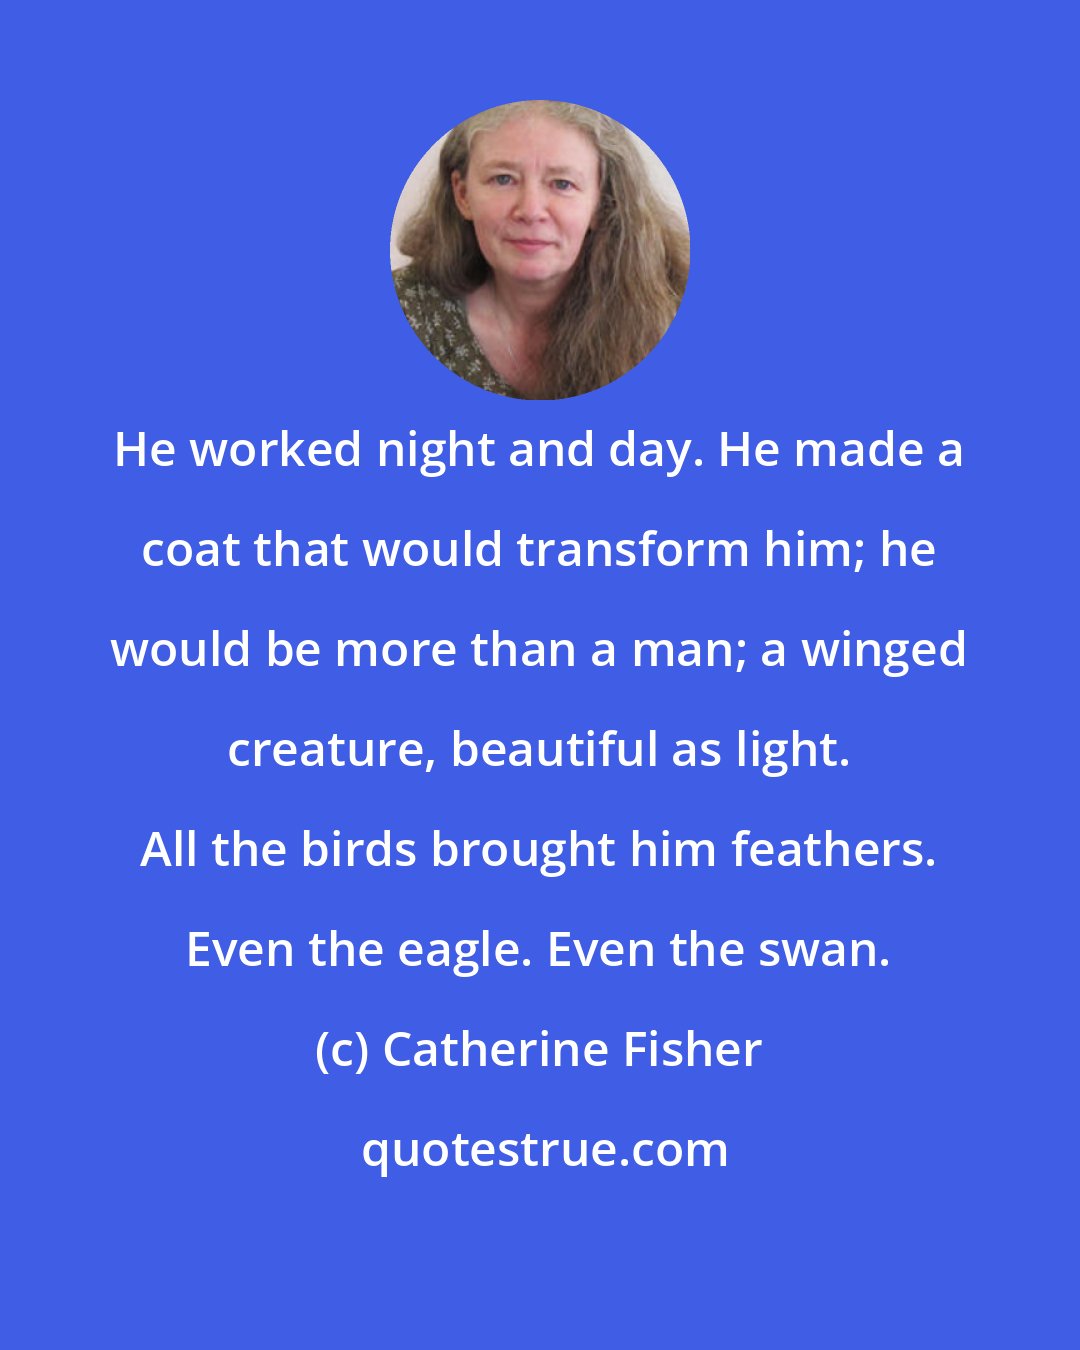 Catherine Fisher: He worked night and day. He made a coat that would transform him; he would be more than a man; a winged creature, beautiful as light. All the birds brought him feathers. Even the eagle. Even the swan.